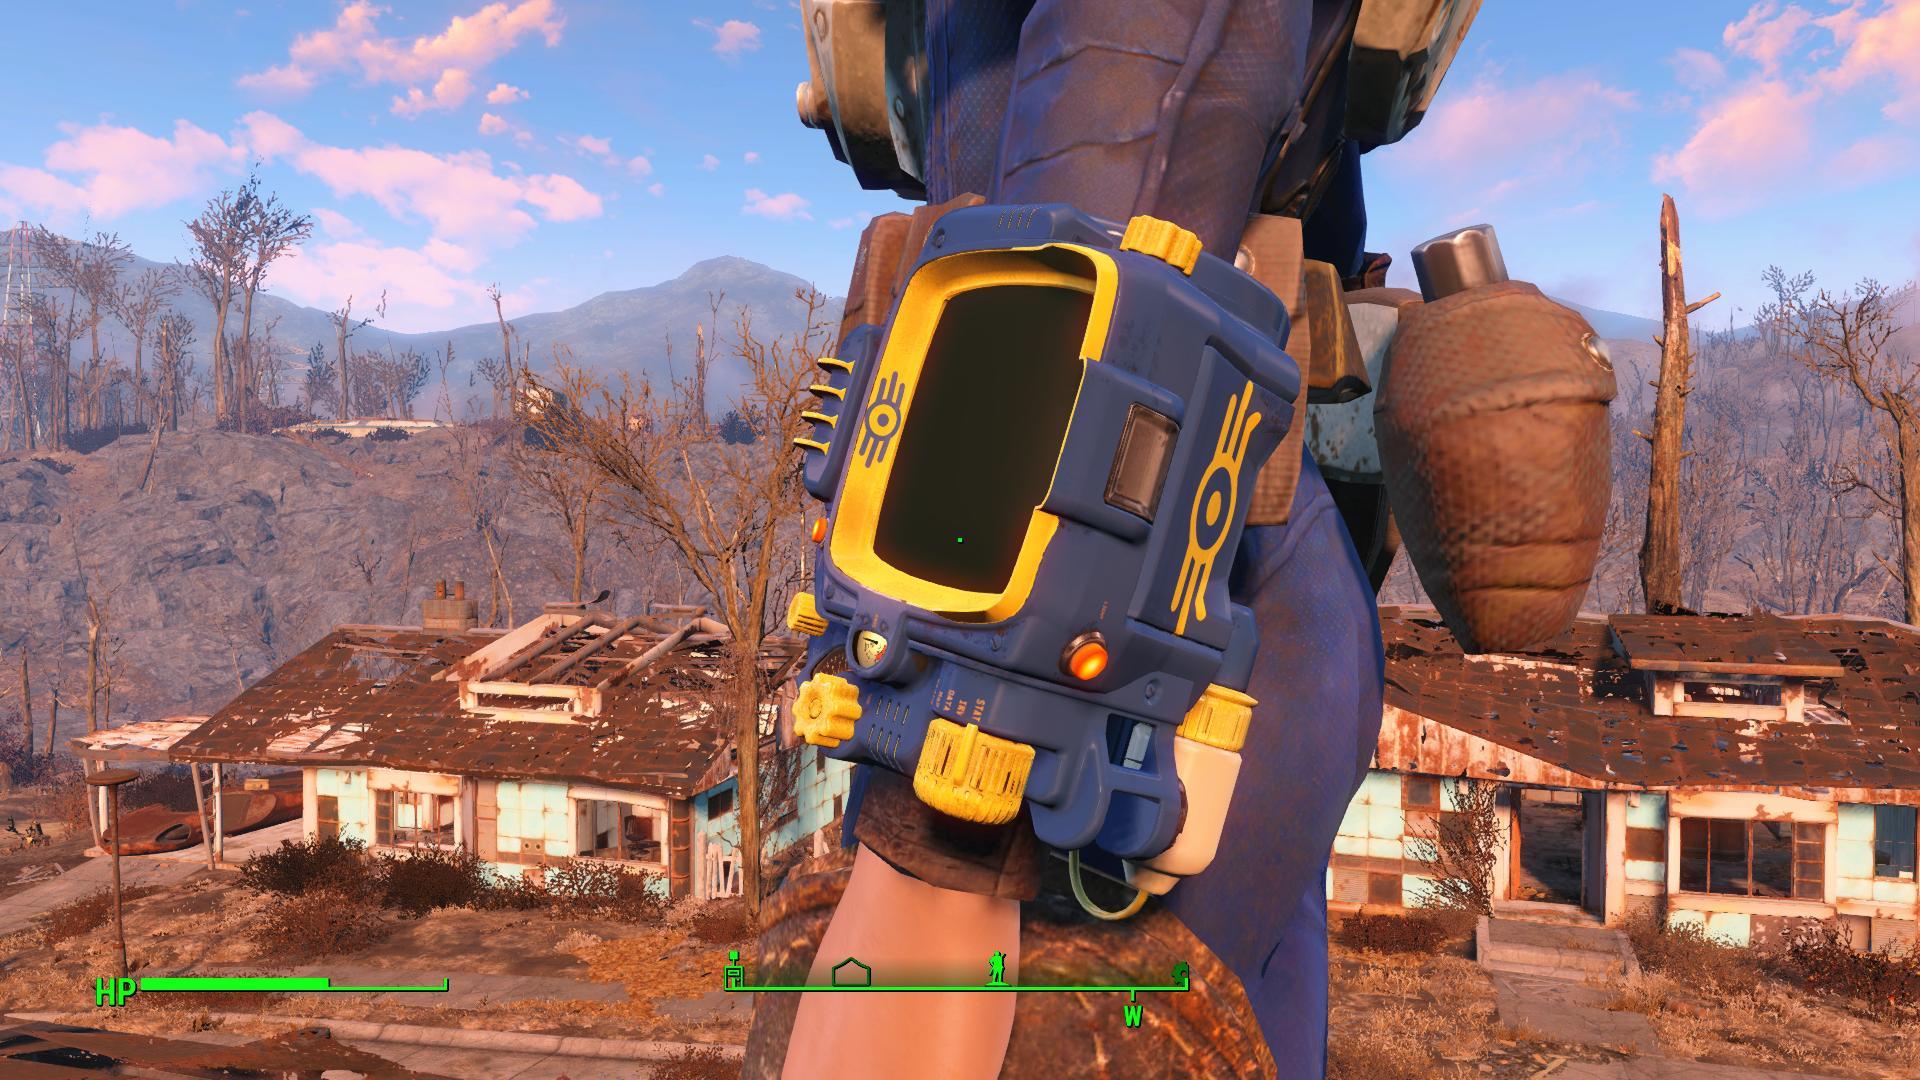 Vault Tec Branded PipBoy 3000 Fallout 4 Mod Download